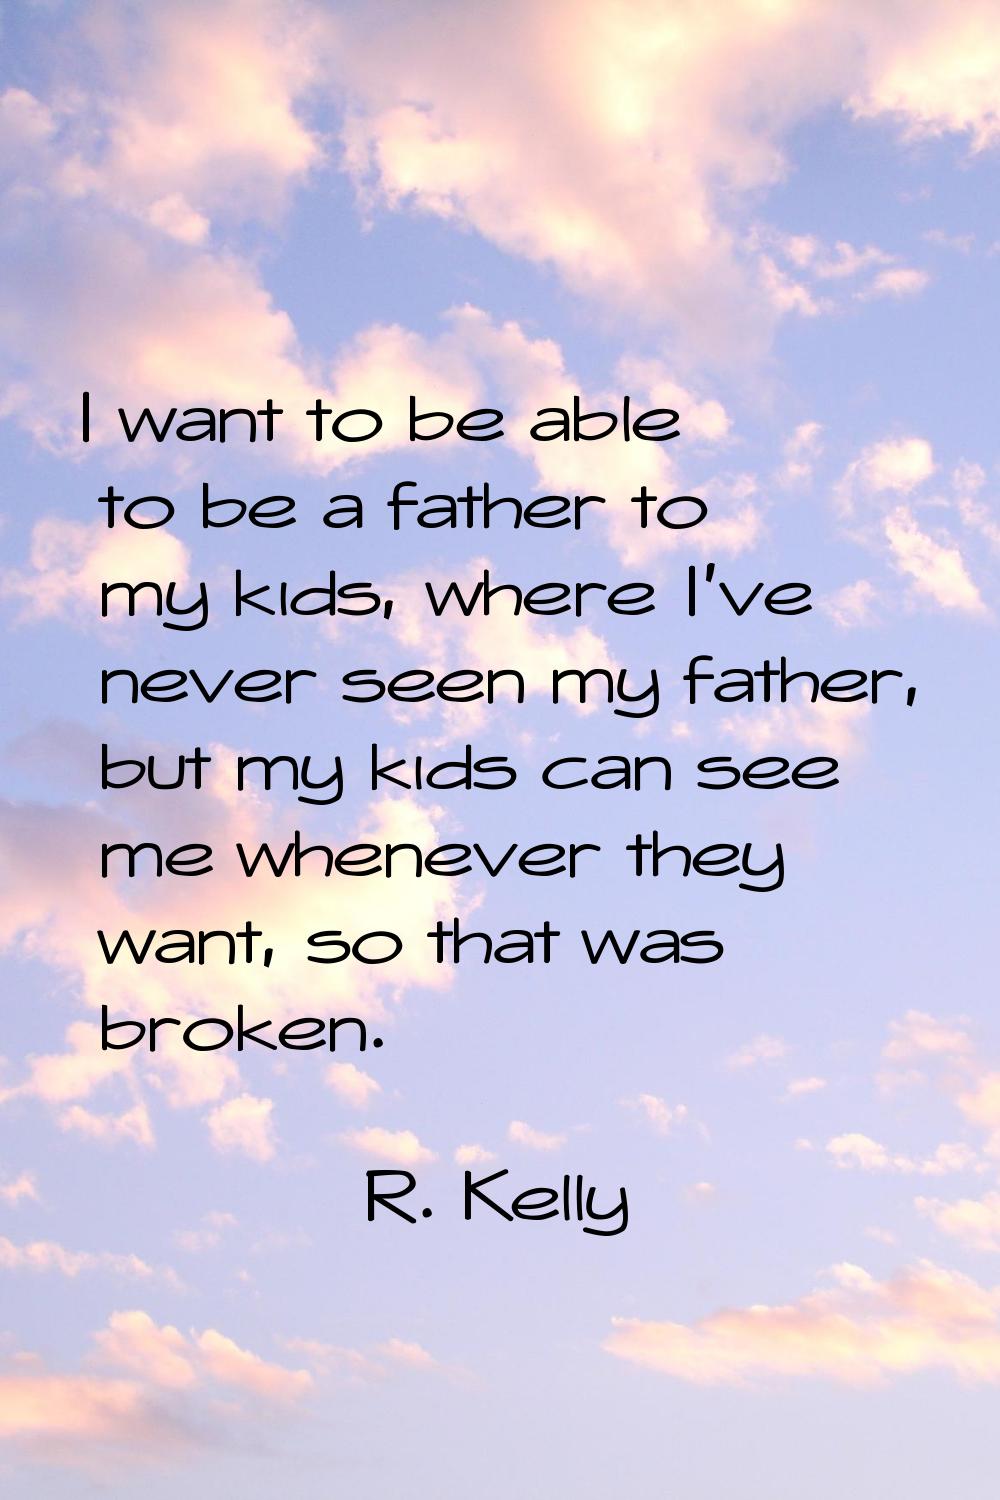 I want to be able to be a father to my kids, where I've never seen my father, but my kids can see m